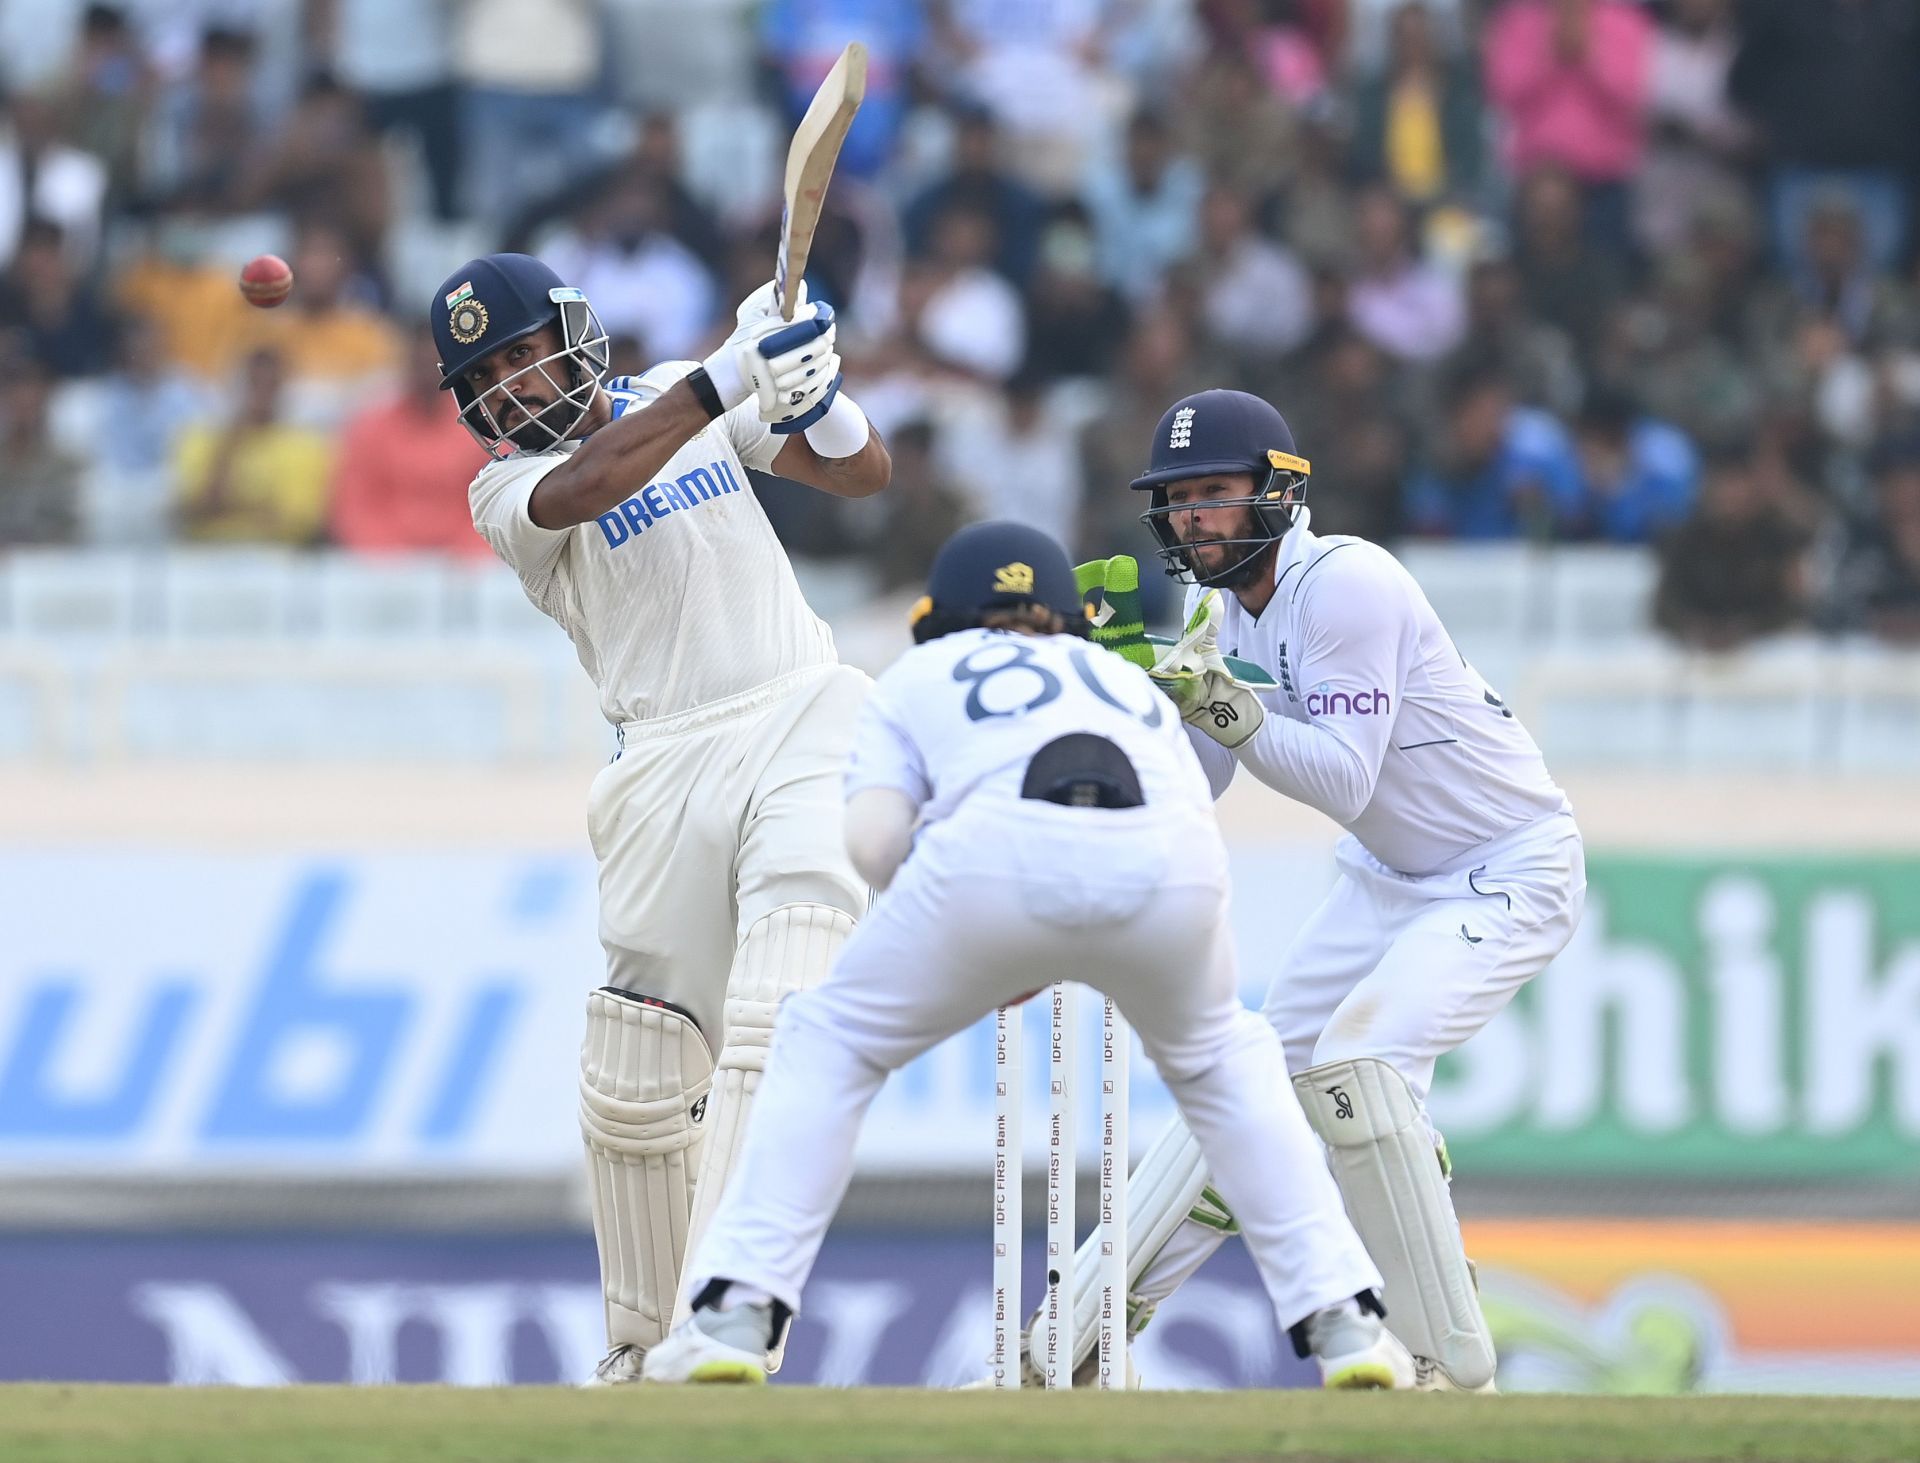 Dhruv Jurel has stood out among India&rsquo;s Test debutants in this series. (Pic: Getty Images)